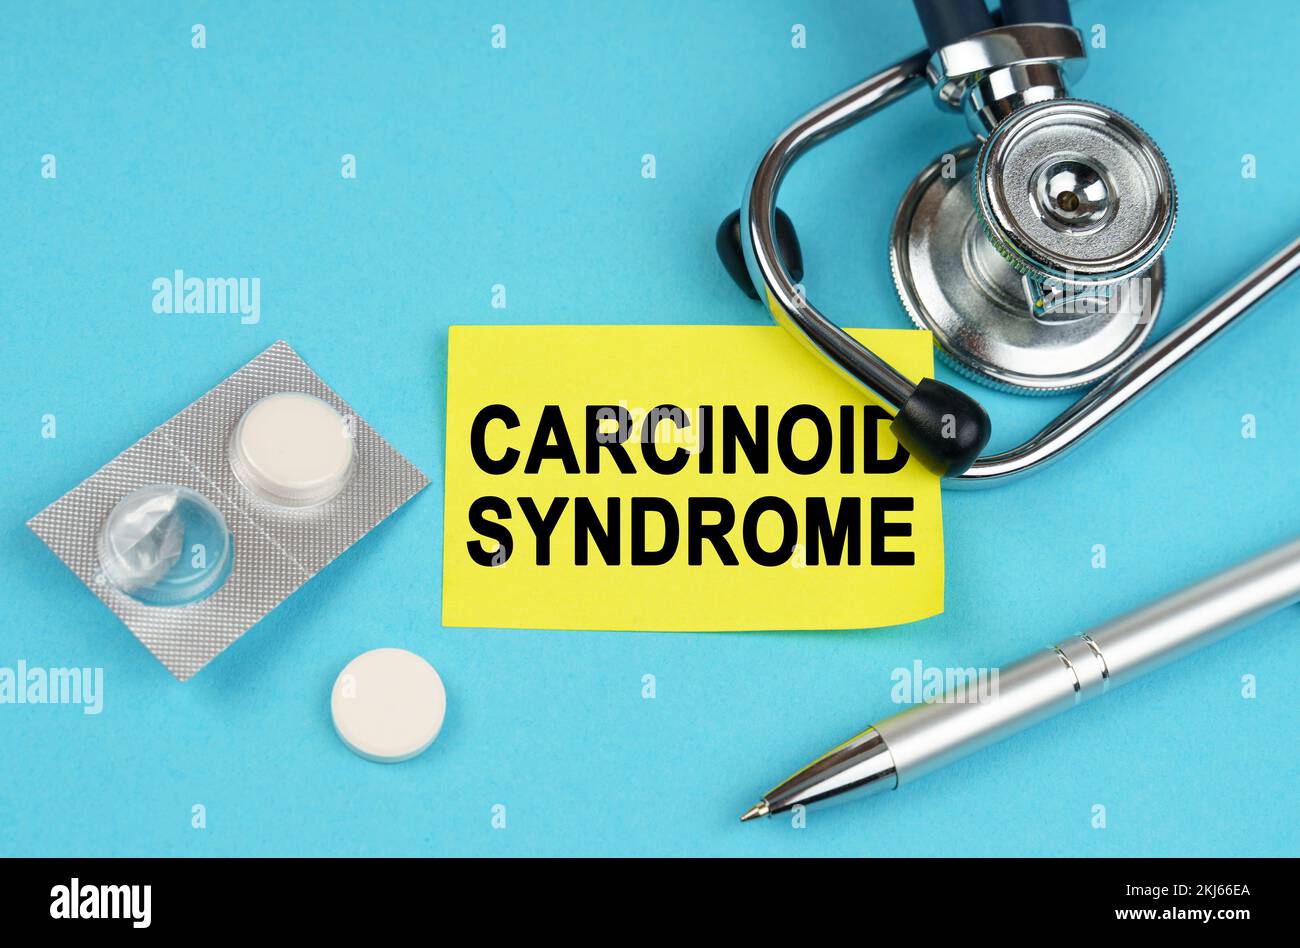 Medical concept. On a blue surface, a stethoscope, pills, a pen and a yellow sticker with the inscription - Carcinoid syndrome Stock Photo